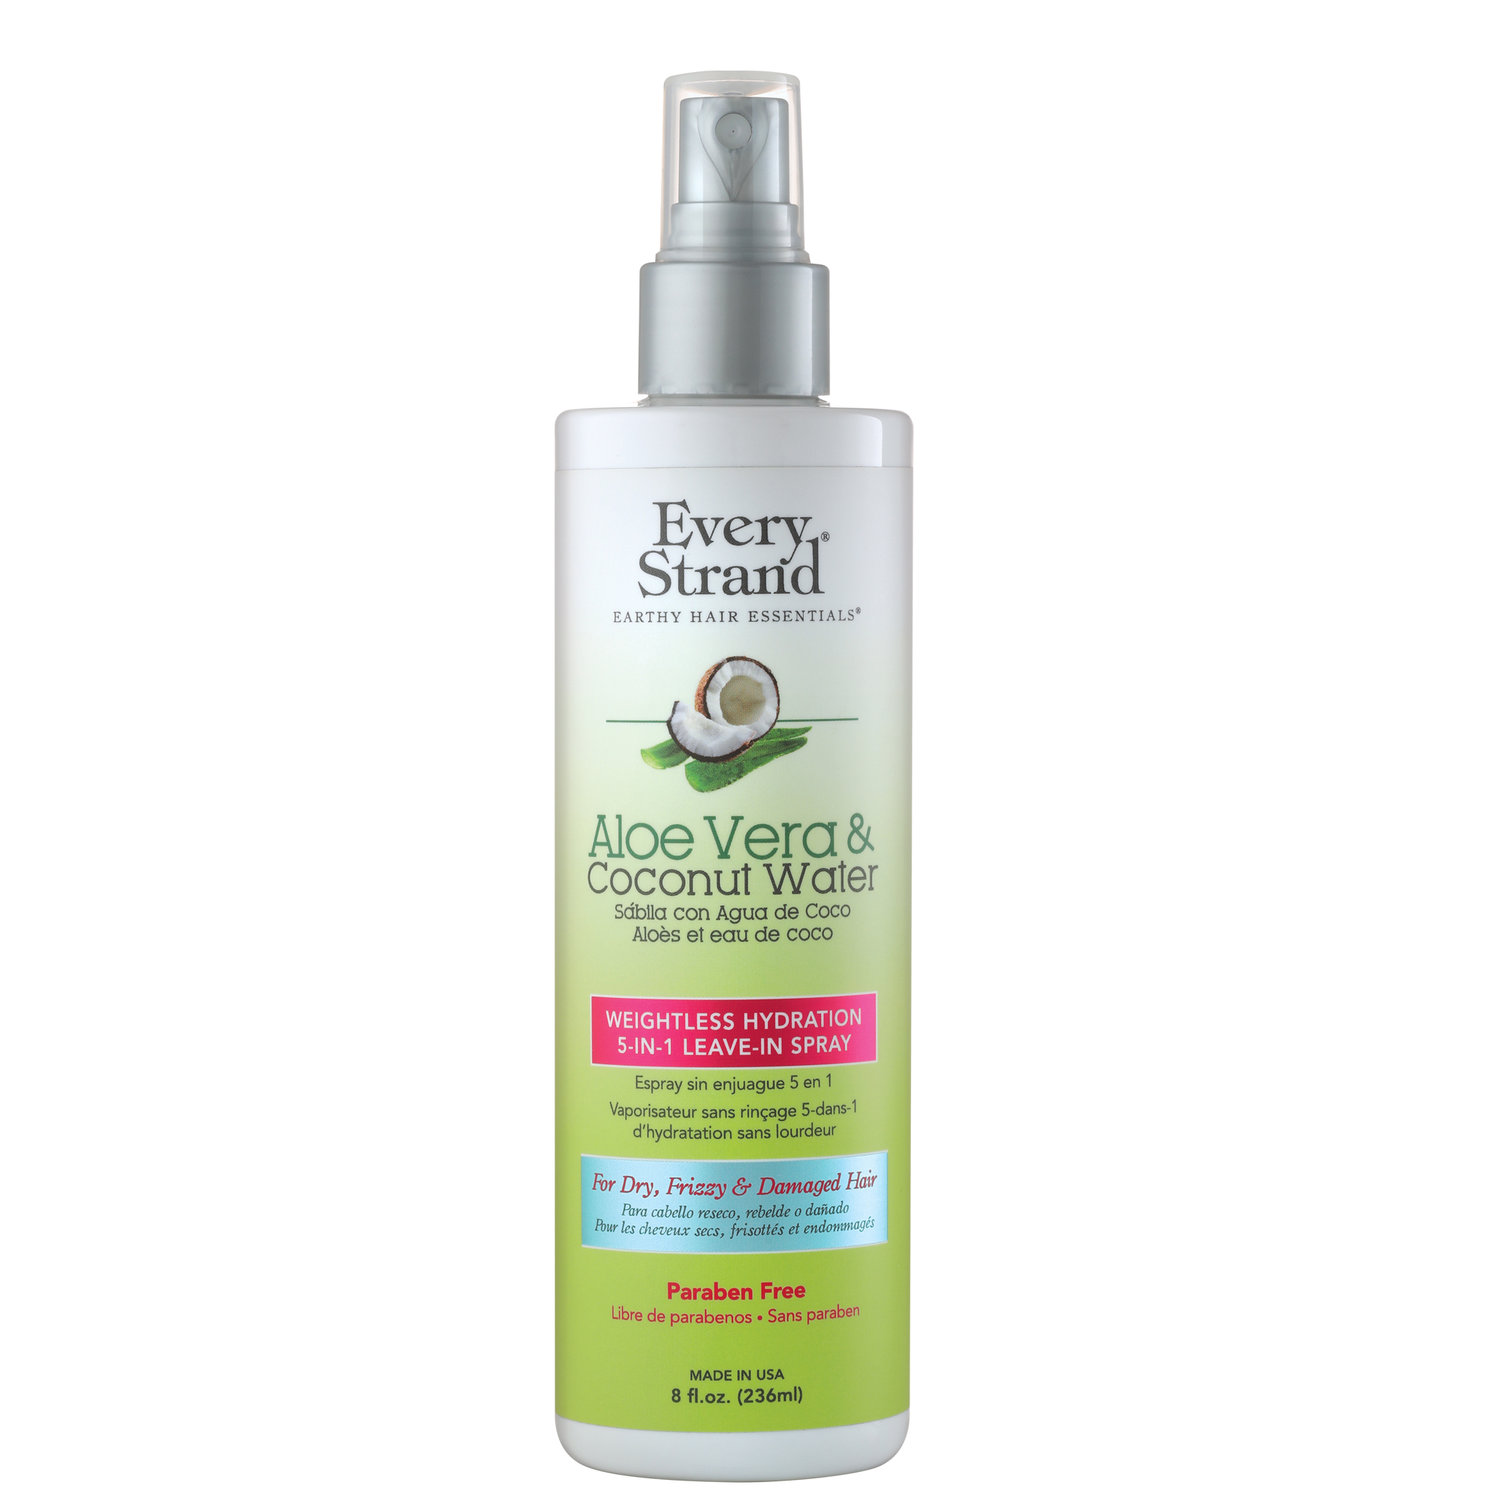 Aloe Vera & Coconut Water Weightless Hydration 5-IN-1 Leave -In Spray / 8oz  — Every Strand